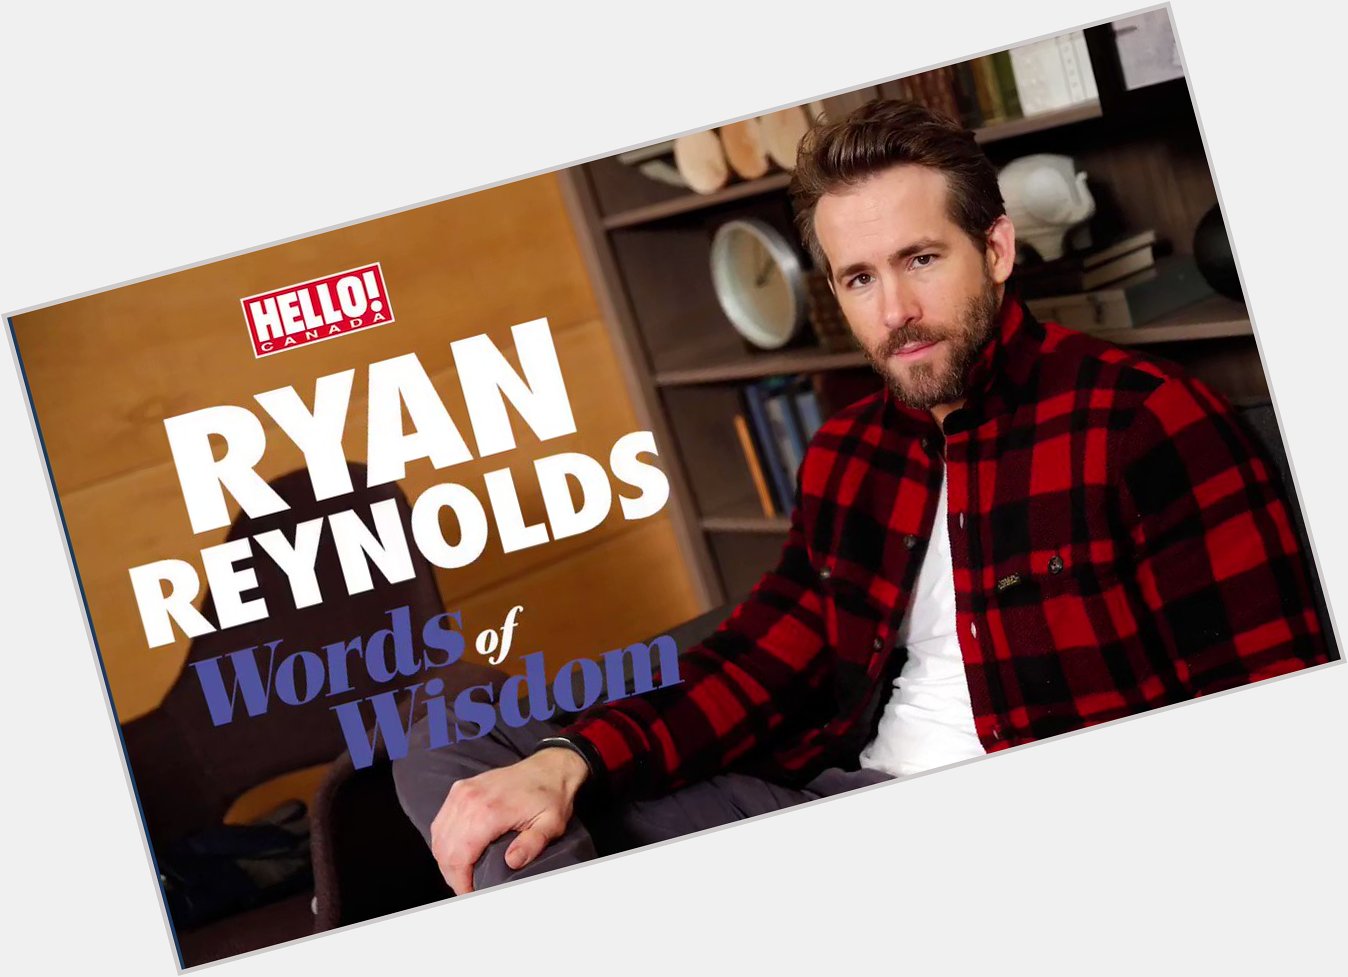 Happy Birthday Ryan Reynolds The Canadian star and father of two turns 41 today! 